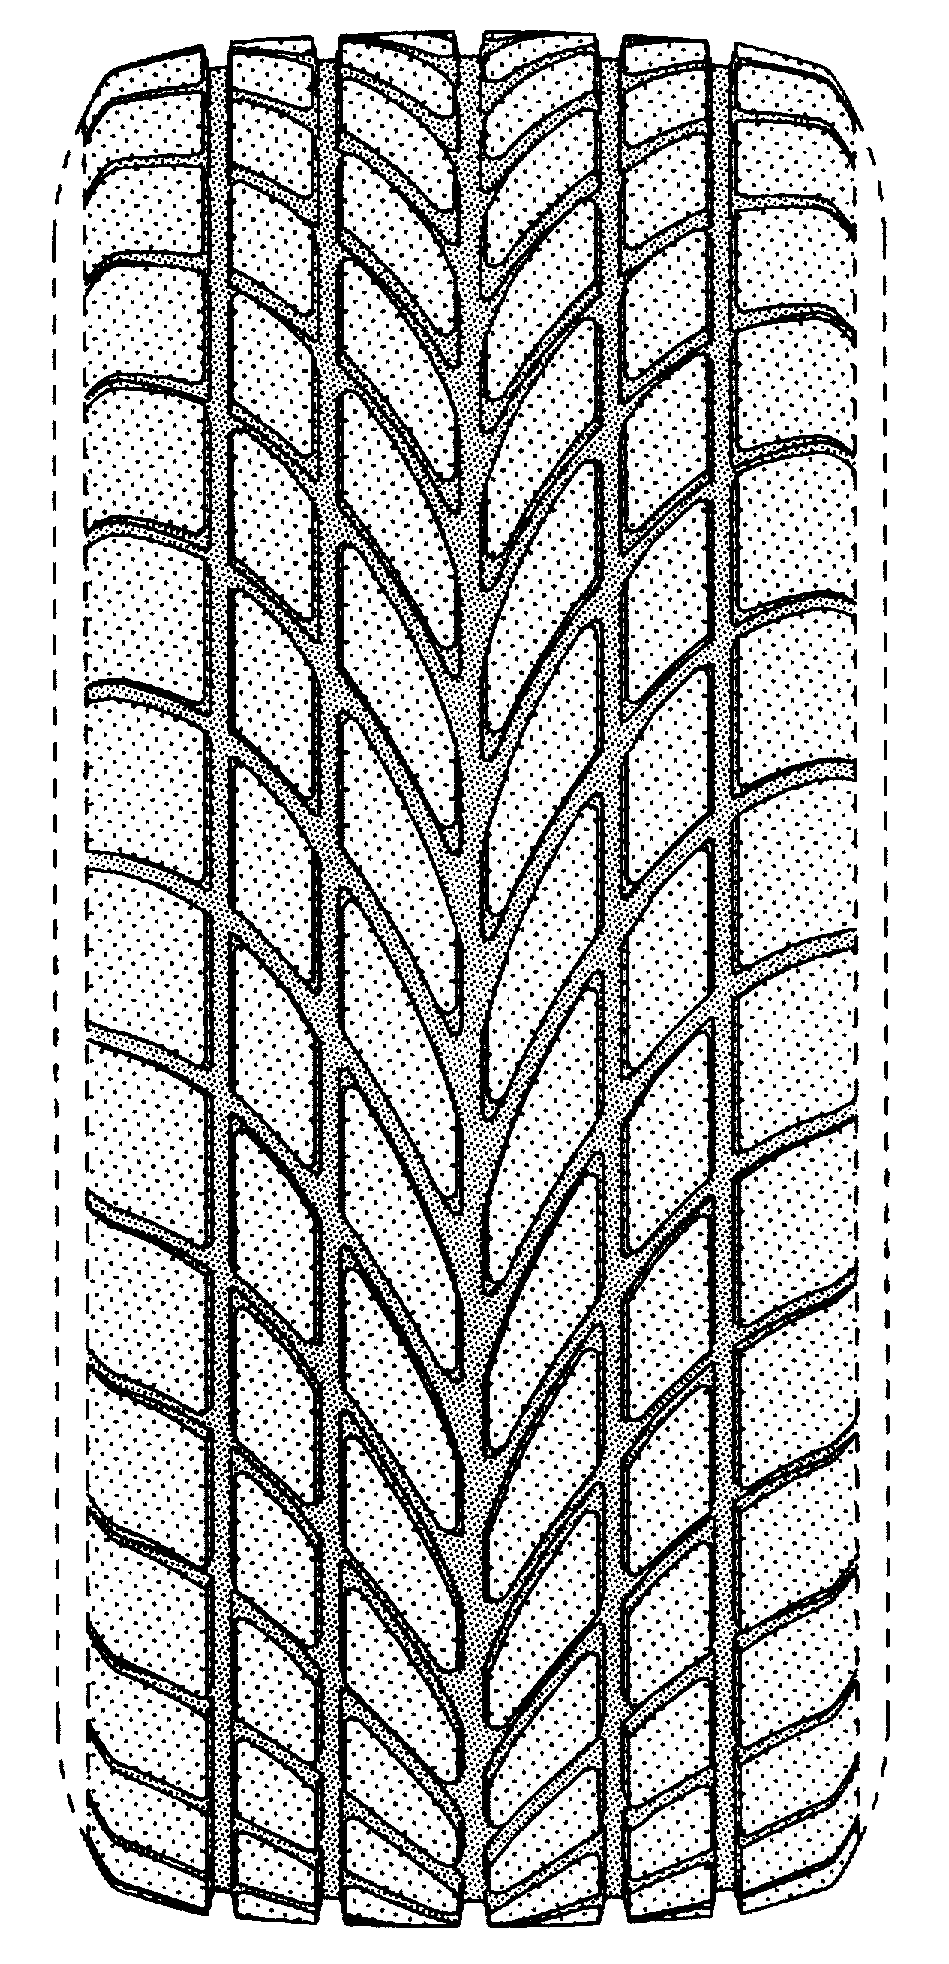 Typical directional type tire tread.
